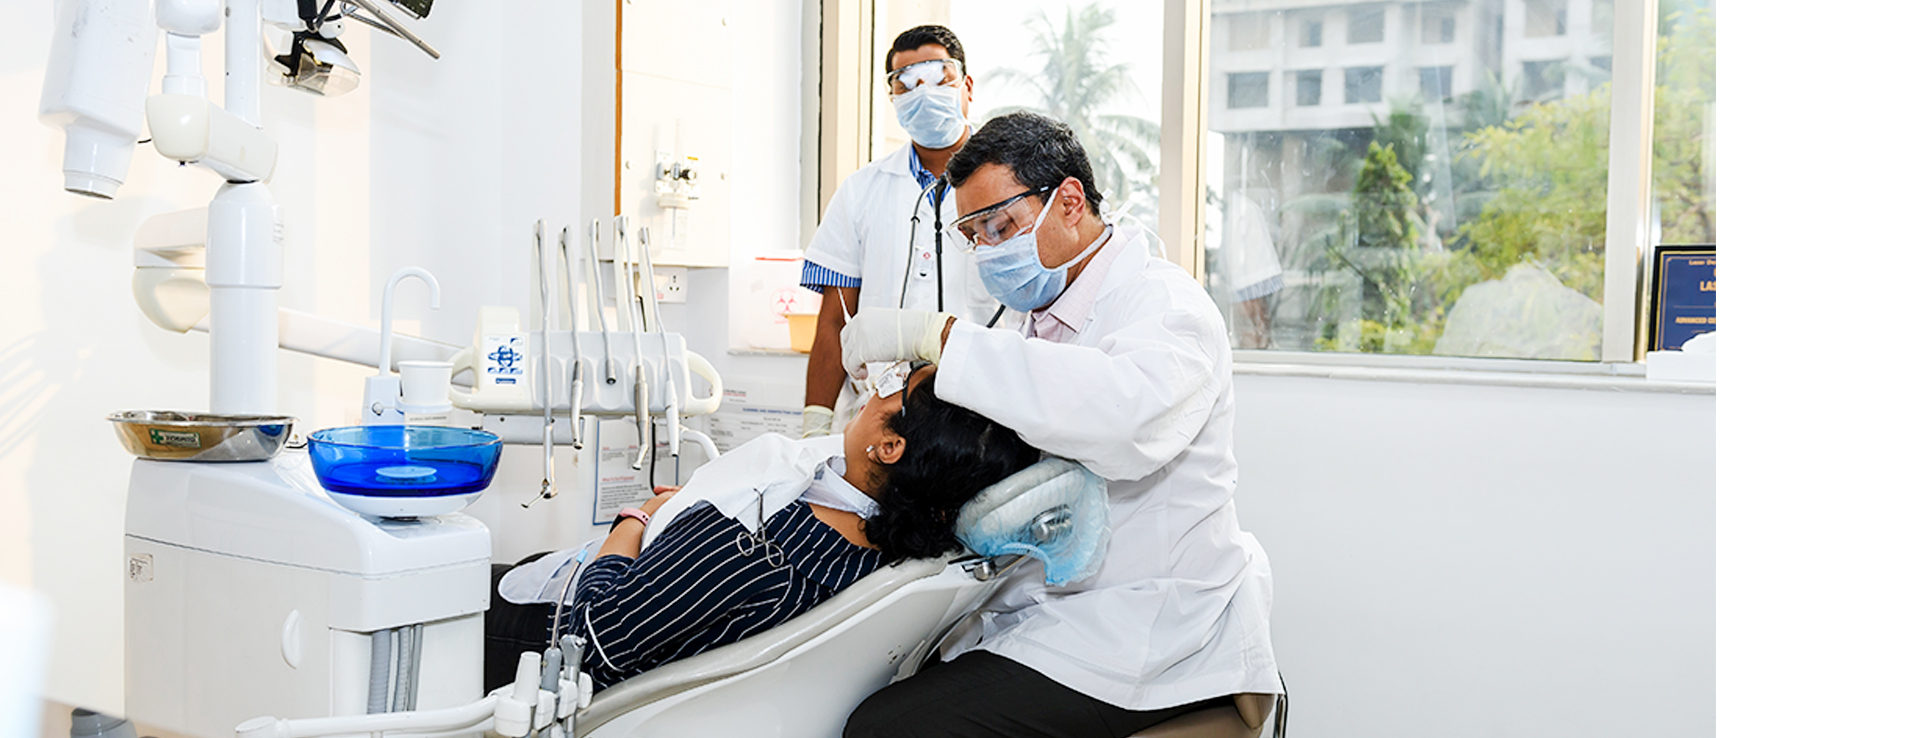 Routine tooth extractions